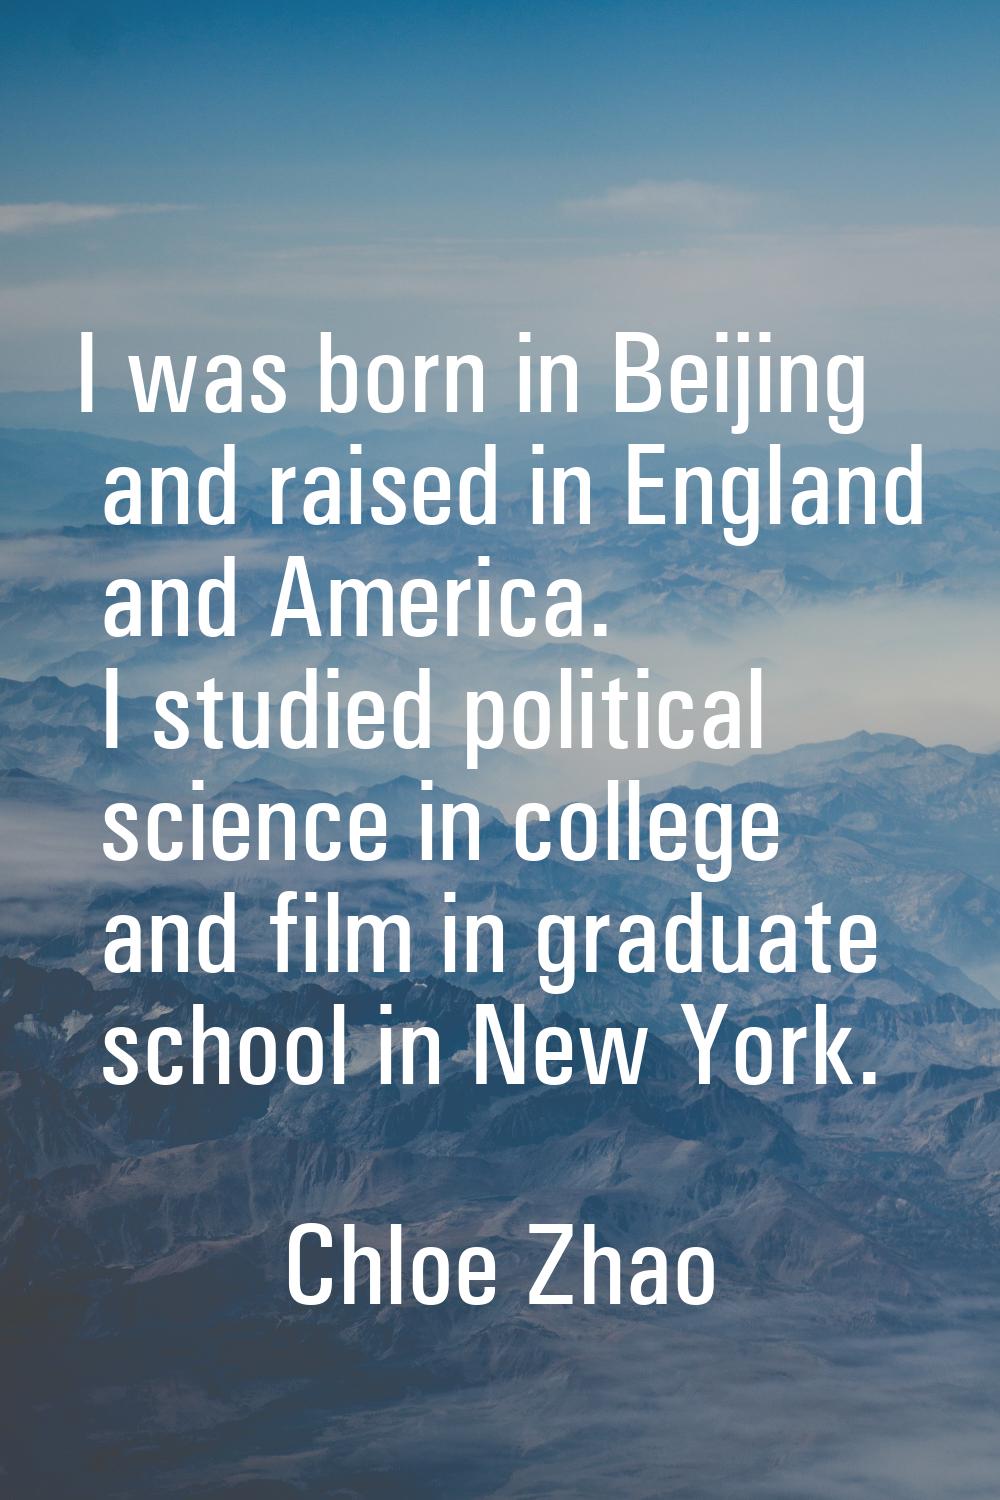 I was born in Beijing and raised in England and America. I studied political science in college and